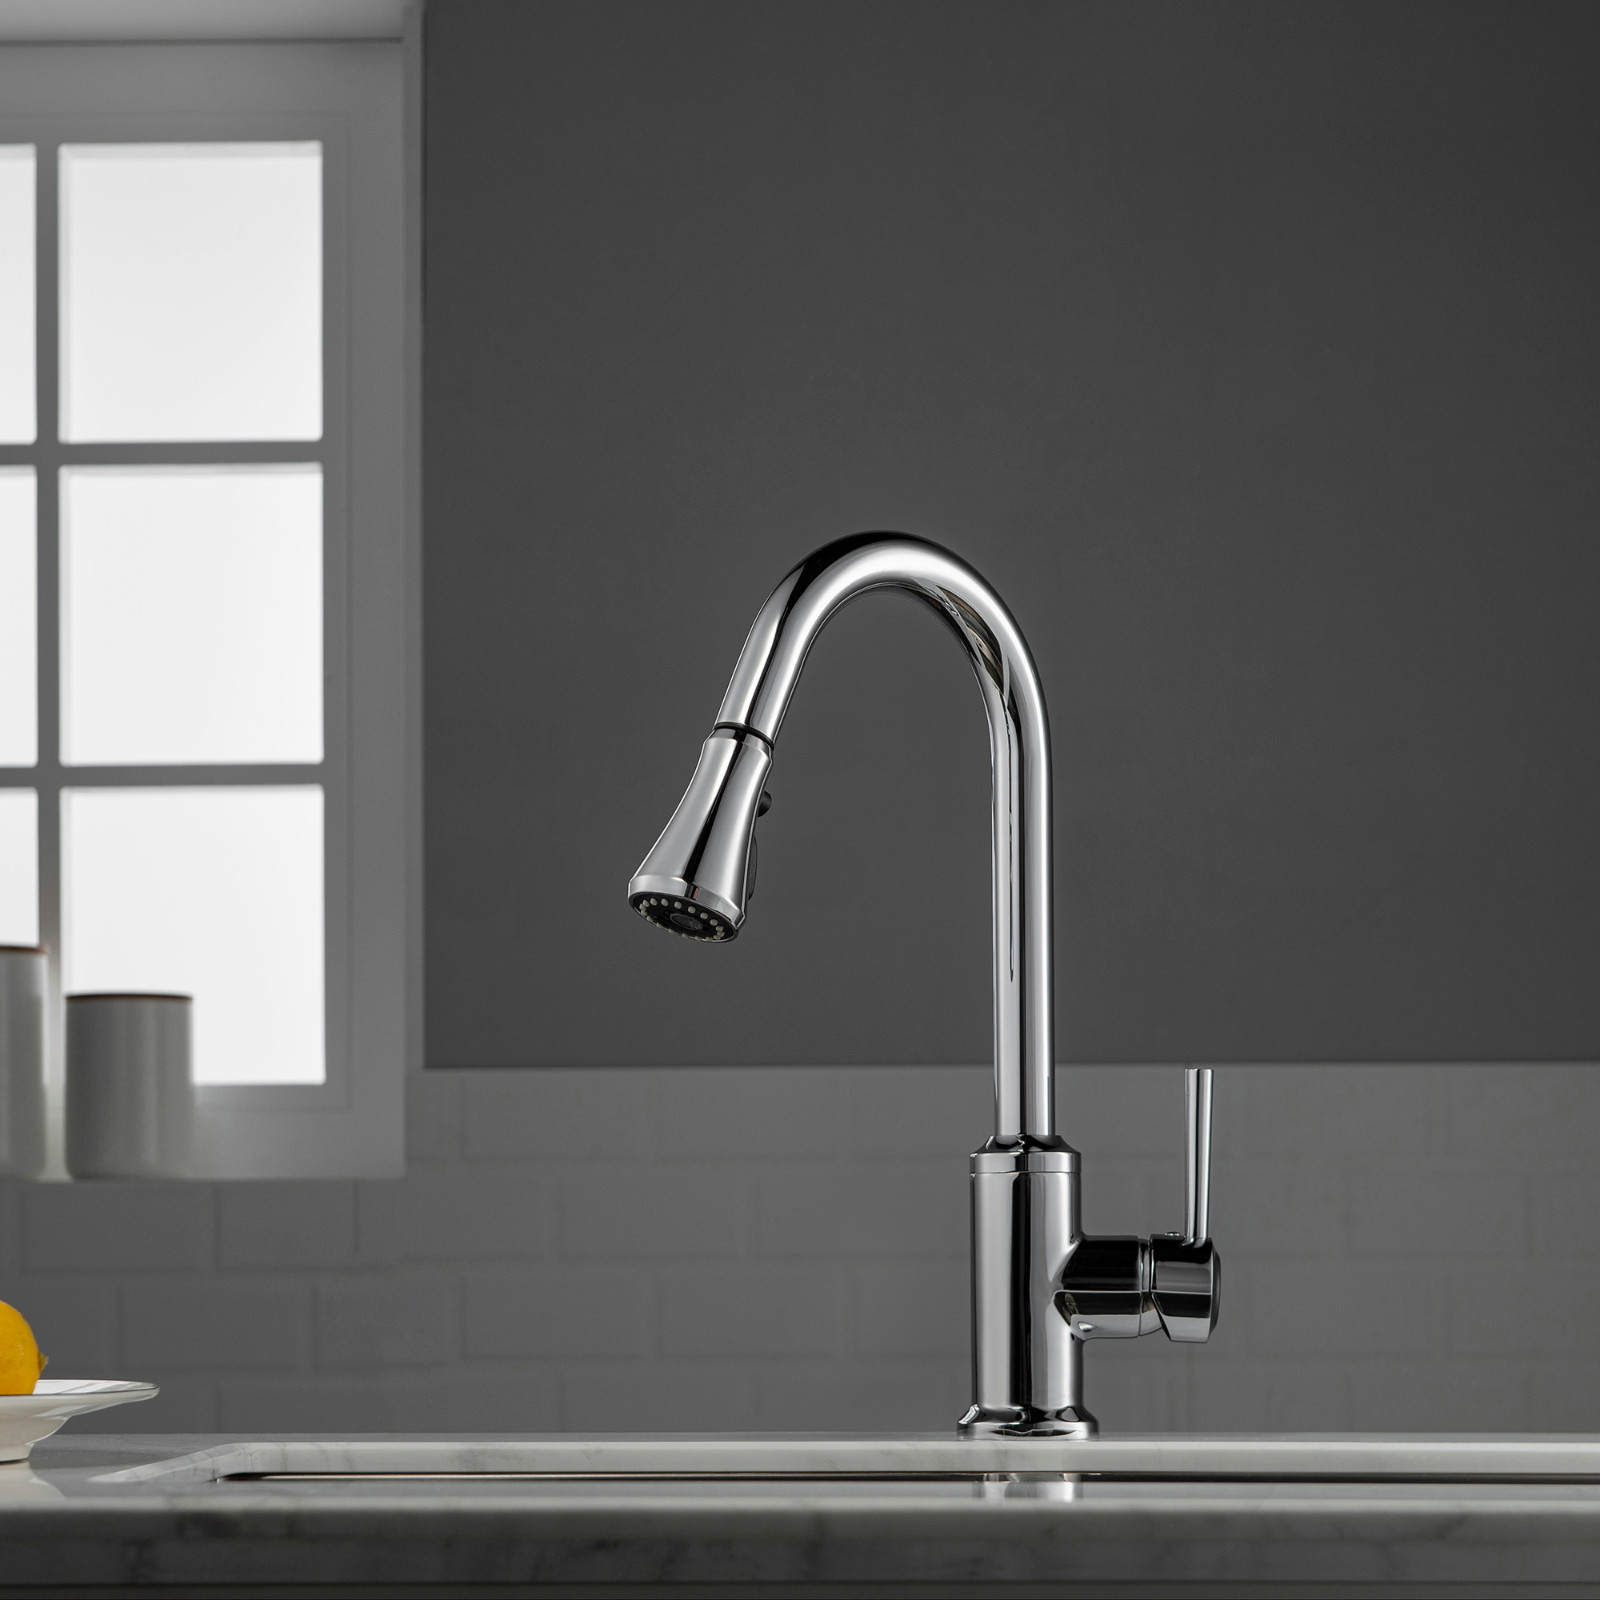  WOODBRIDGE WK101201CH Stainless Steel Single Handle Pull Down Kitchen Faucet in Chrome Finish._9019